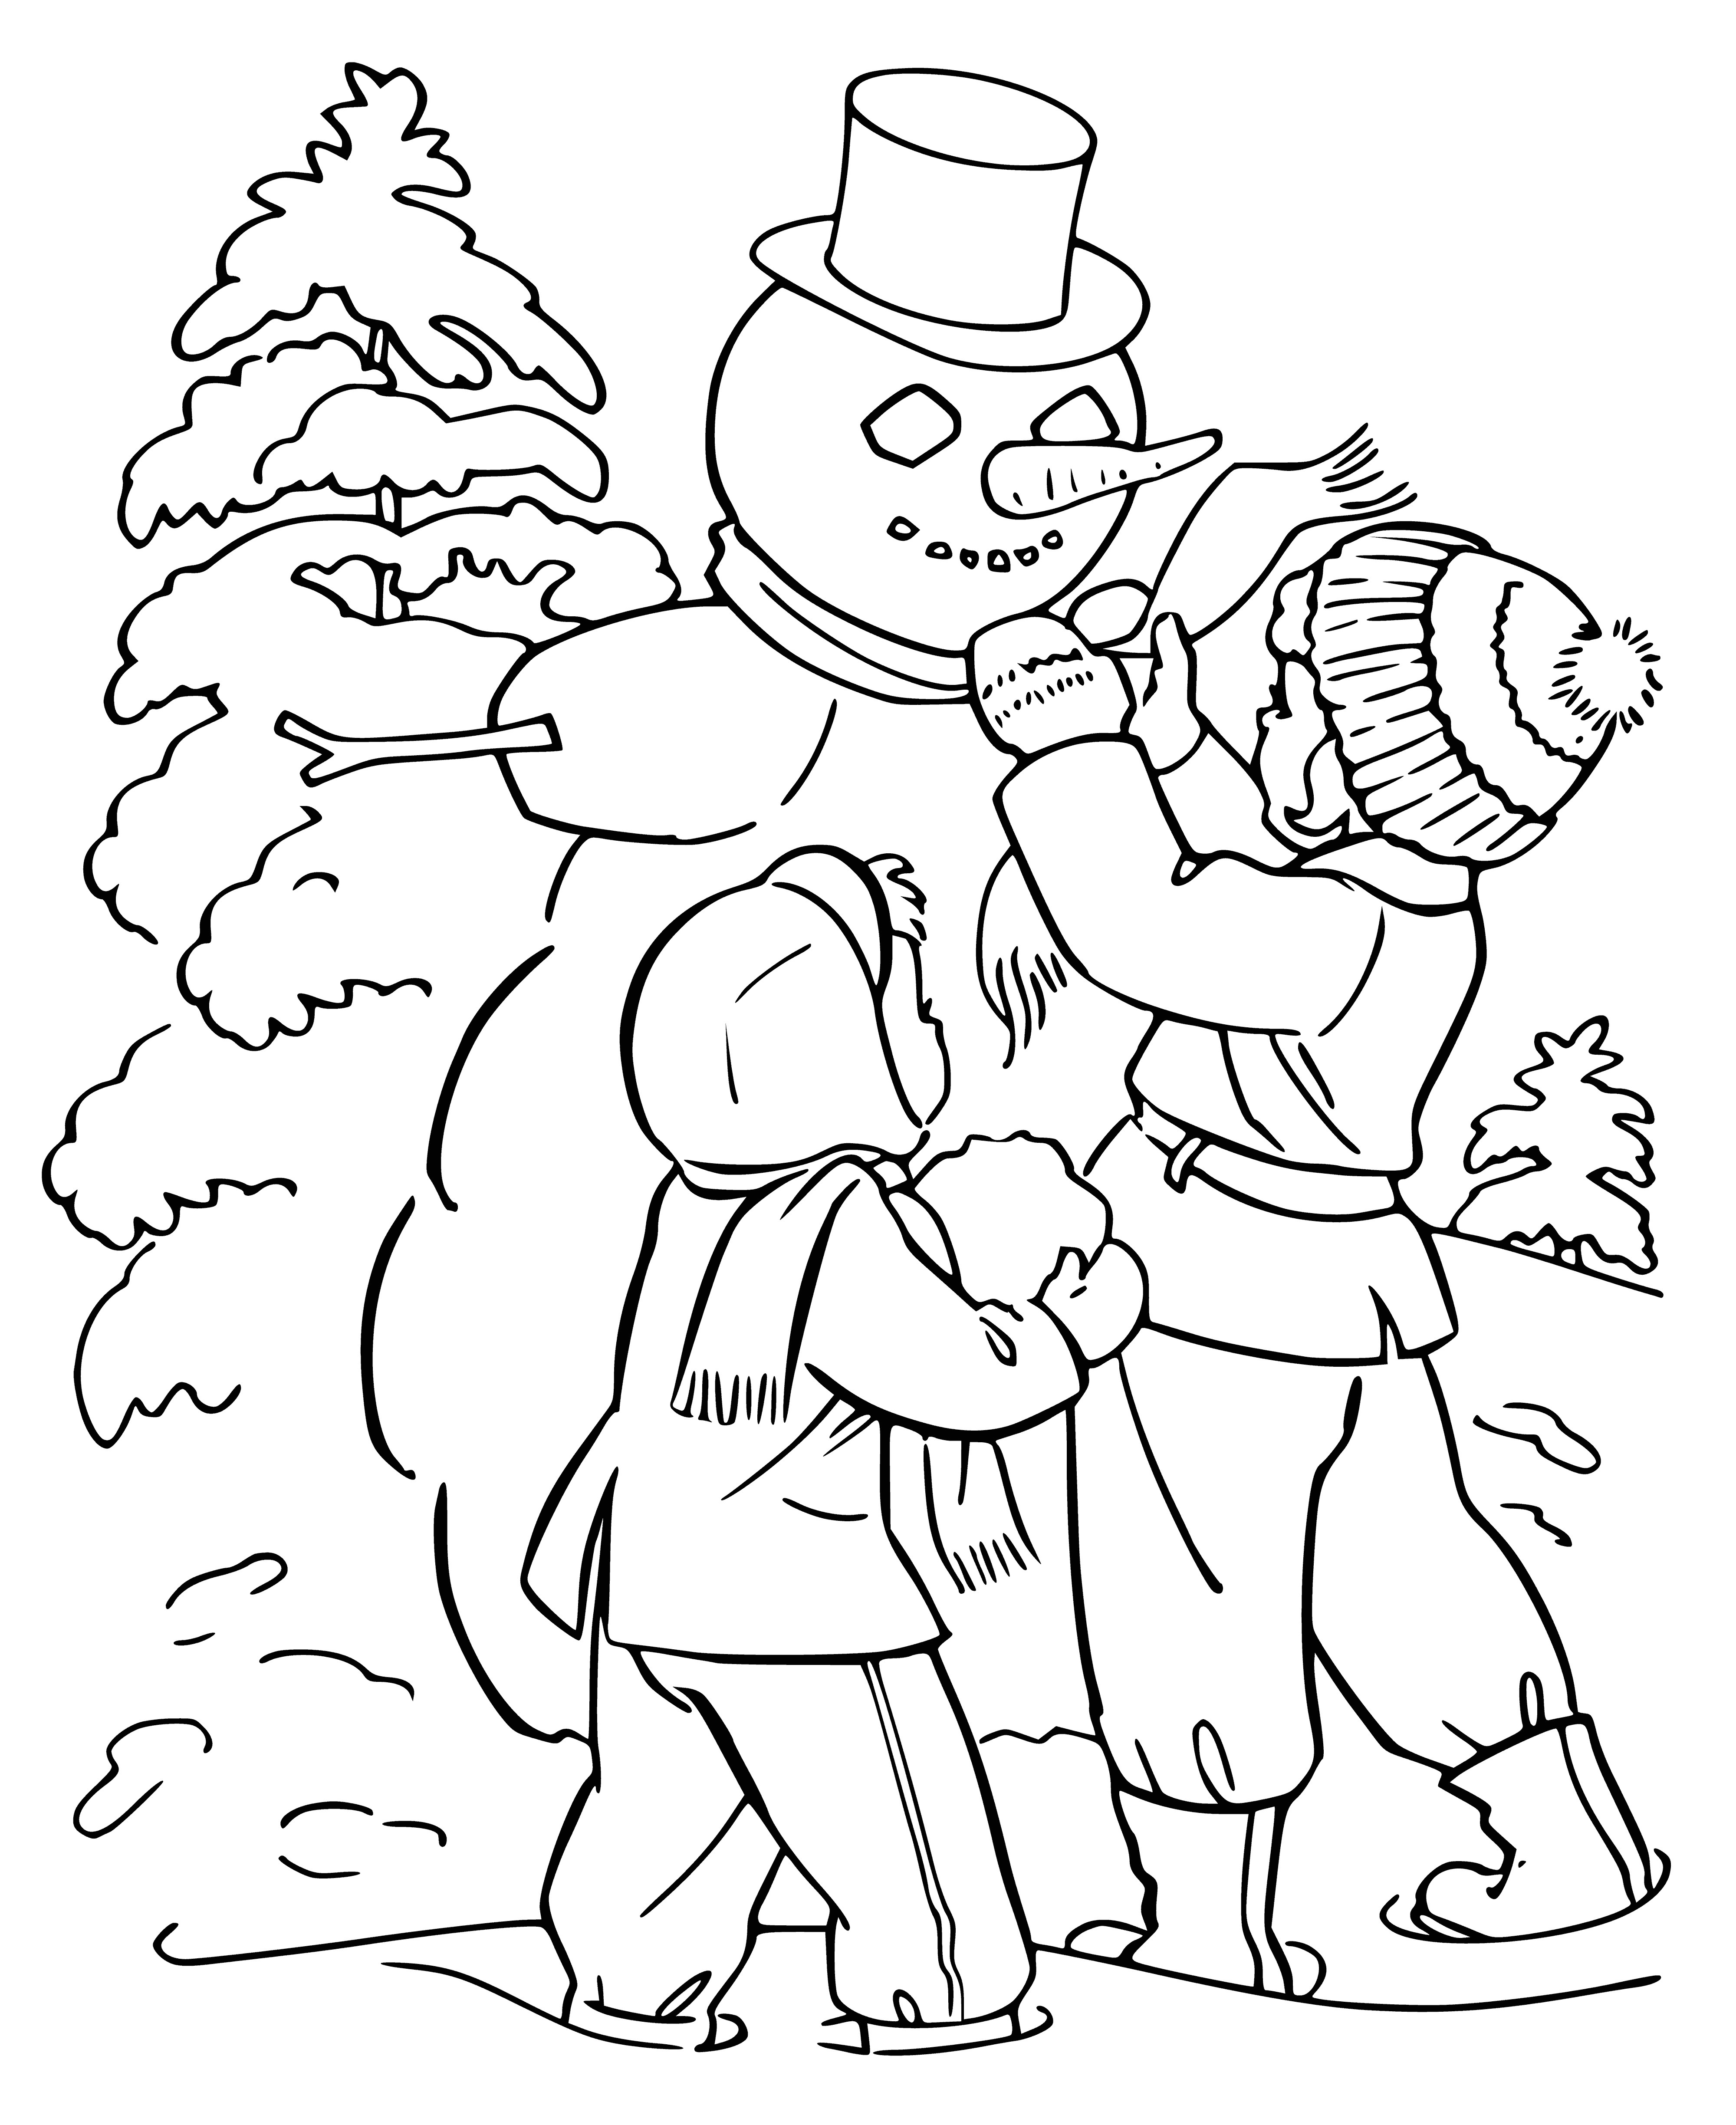 coloring page: Kids making snowmen, rolling balls, packing snow, decorating with sticks/rocks; lots of fun outside in winter!